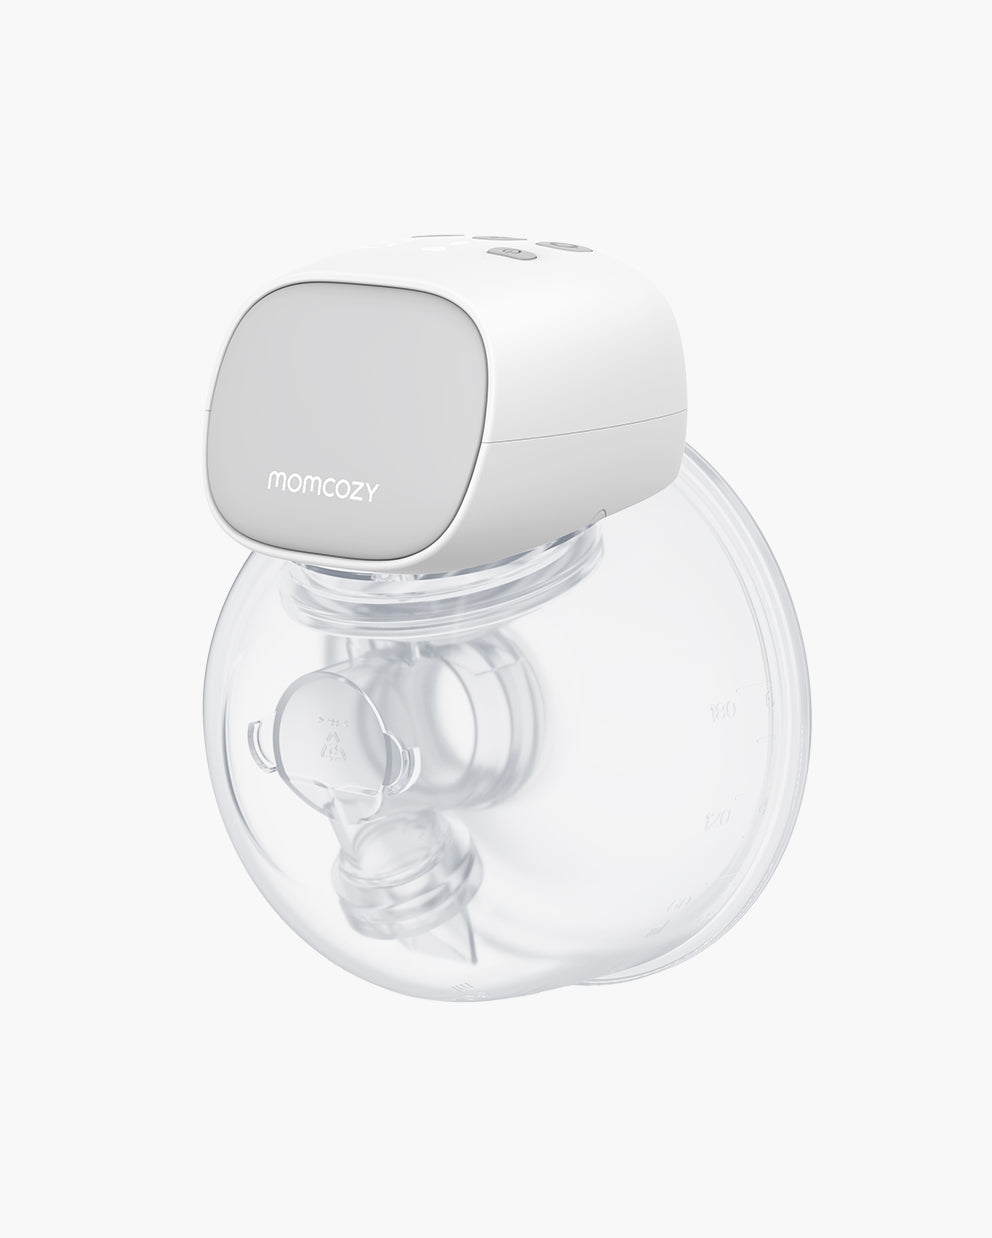 Momcozy's S Pro Series sees early success- S9 Pro ranks #1 in new releases  under 'baby products